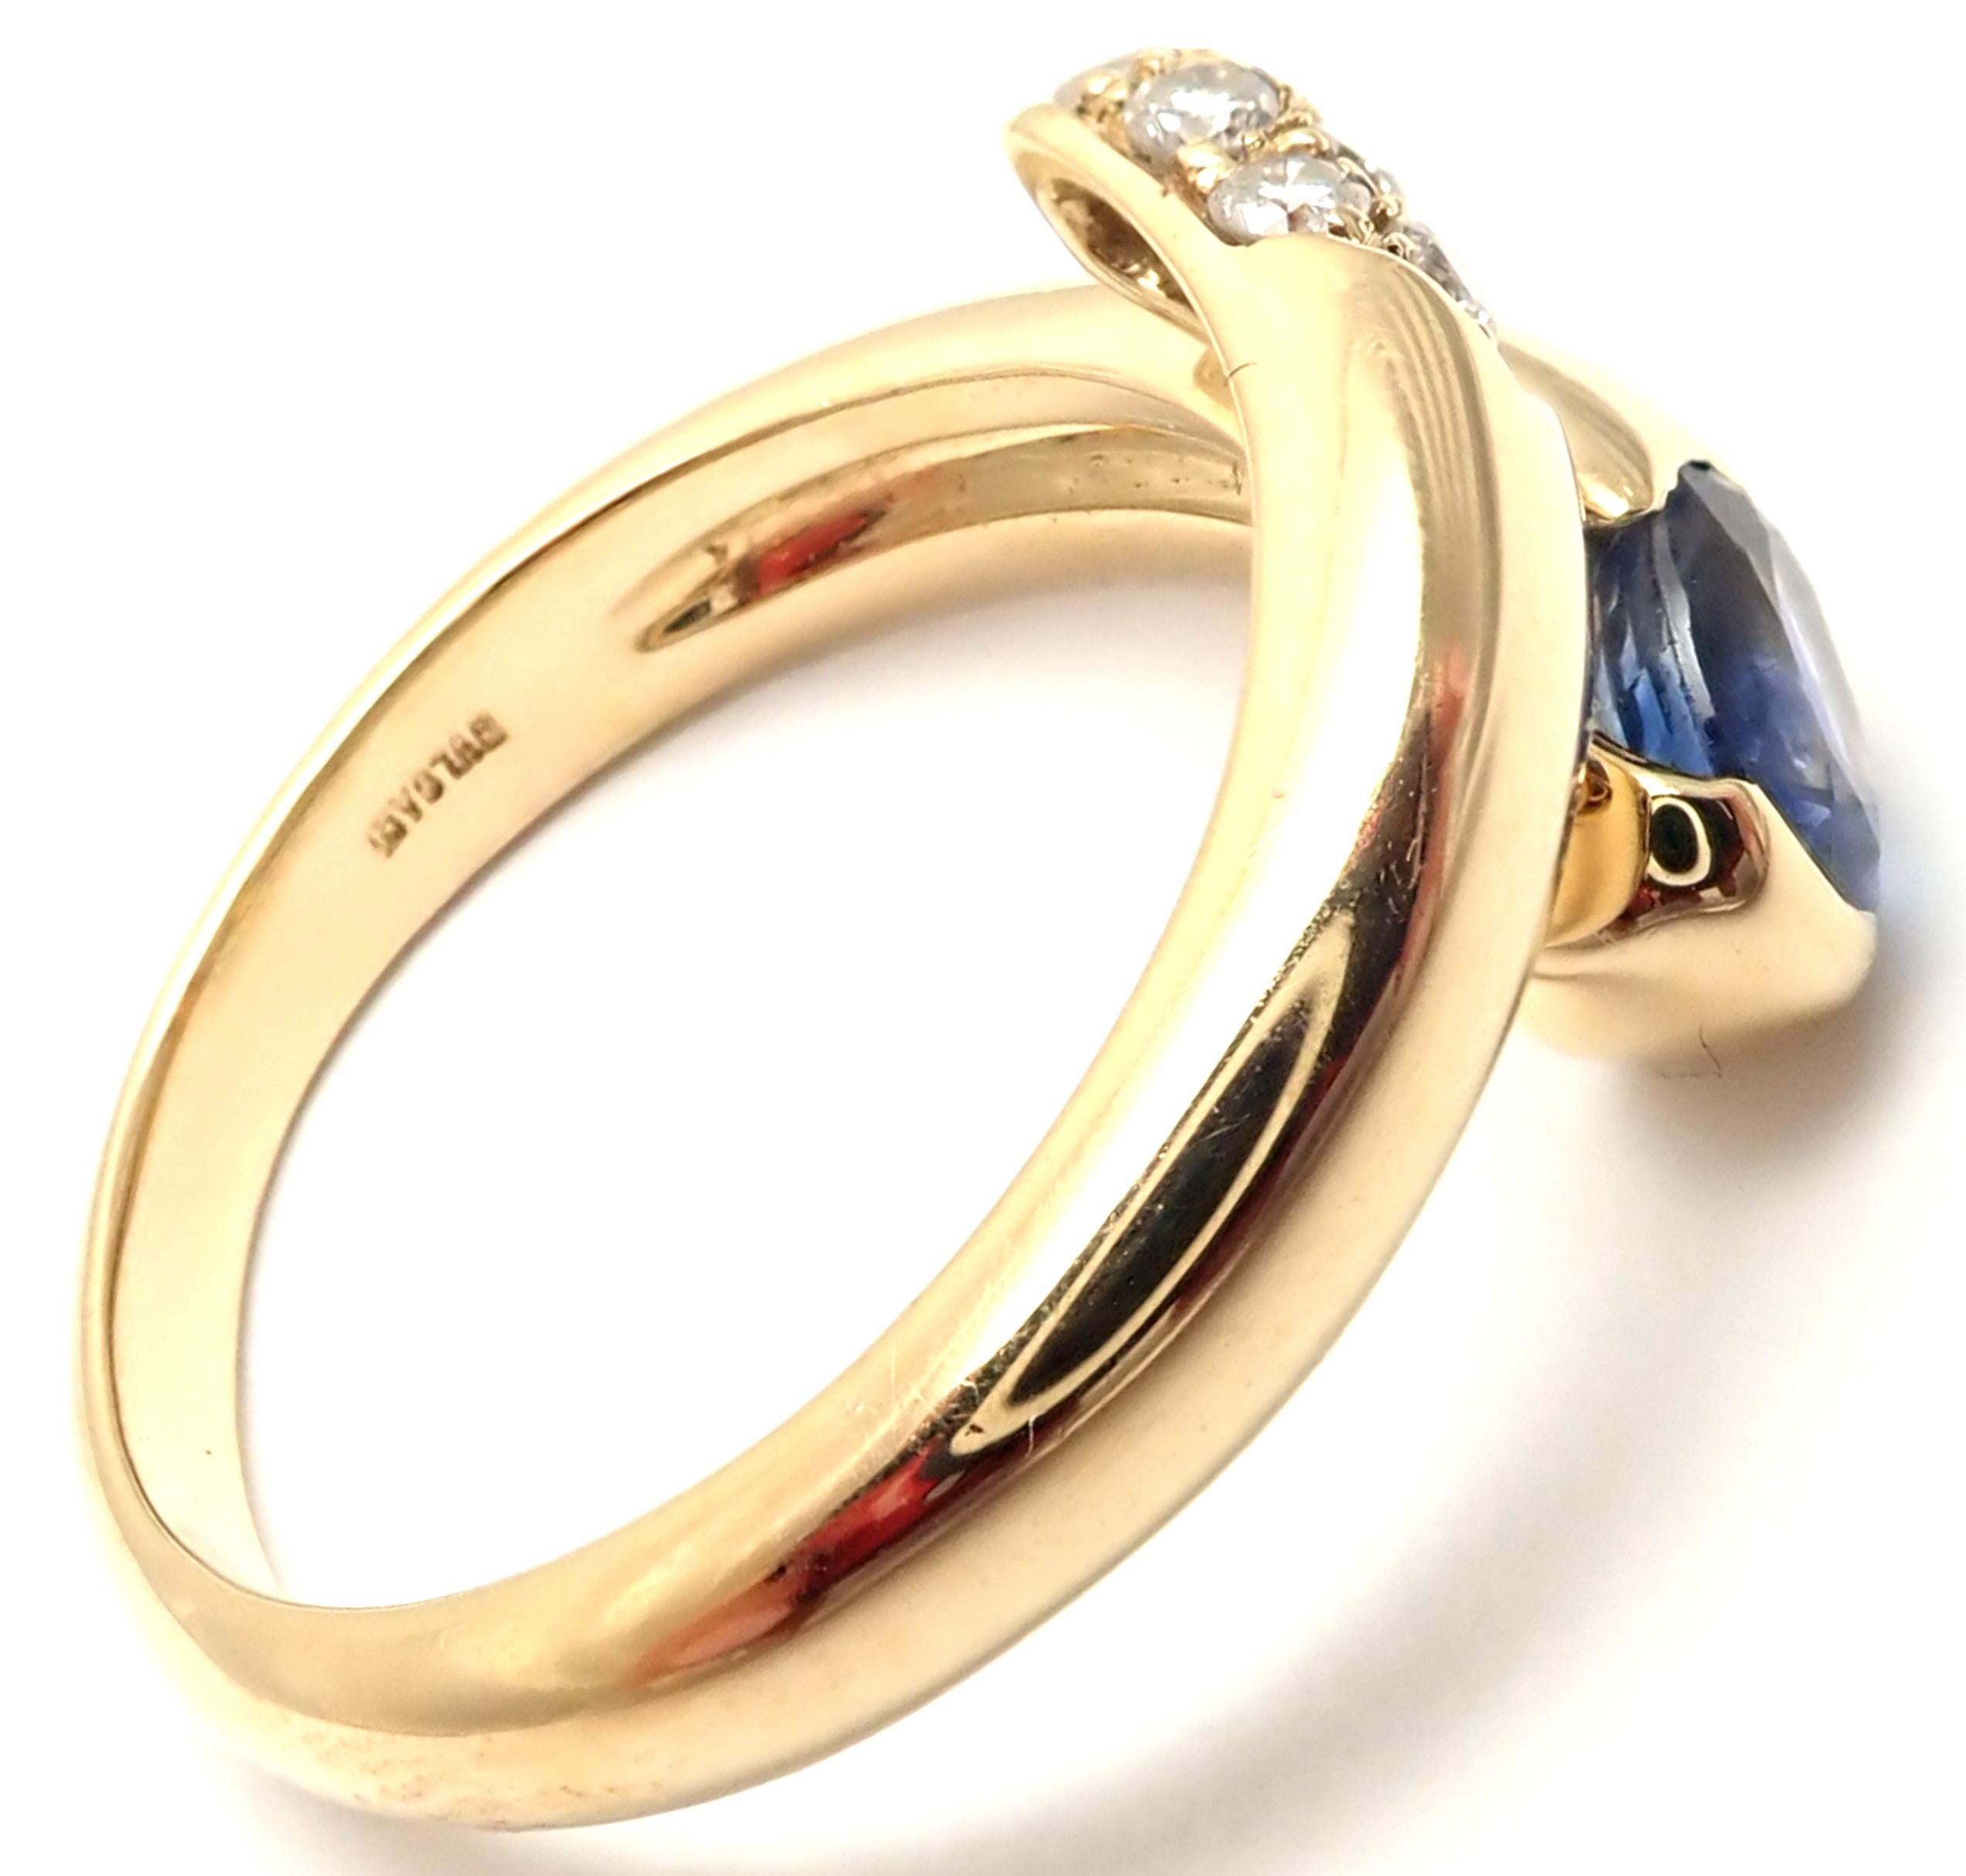 18k Yellow Gold Diamond and Sapphire Ring by Bulgari. 
With 210 round brilliant cut diamonds VS1 clarity, G color total weight approx. .20ct
1 oval cut sapphire 5mm x 5mm
Details: 
Ring Size: 6
Weight: 6.3 grams
Width: 11mm
Stamped Hallmarks: